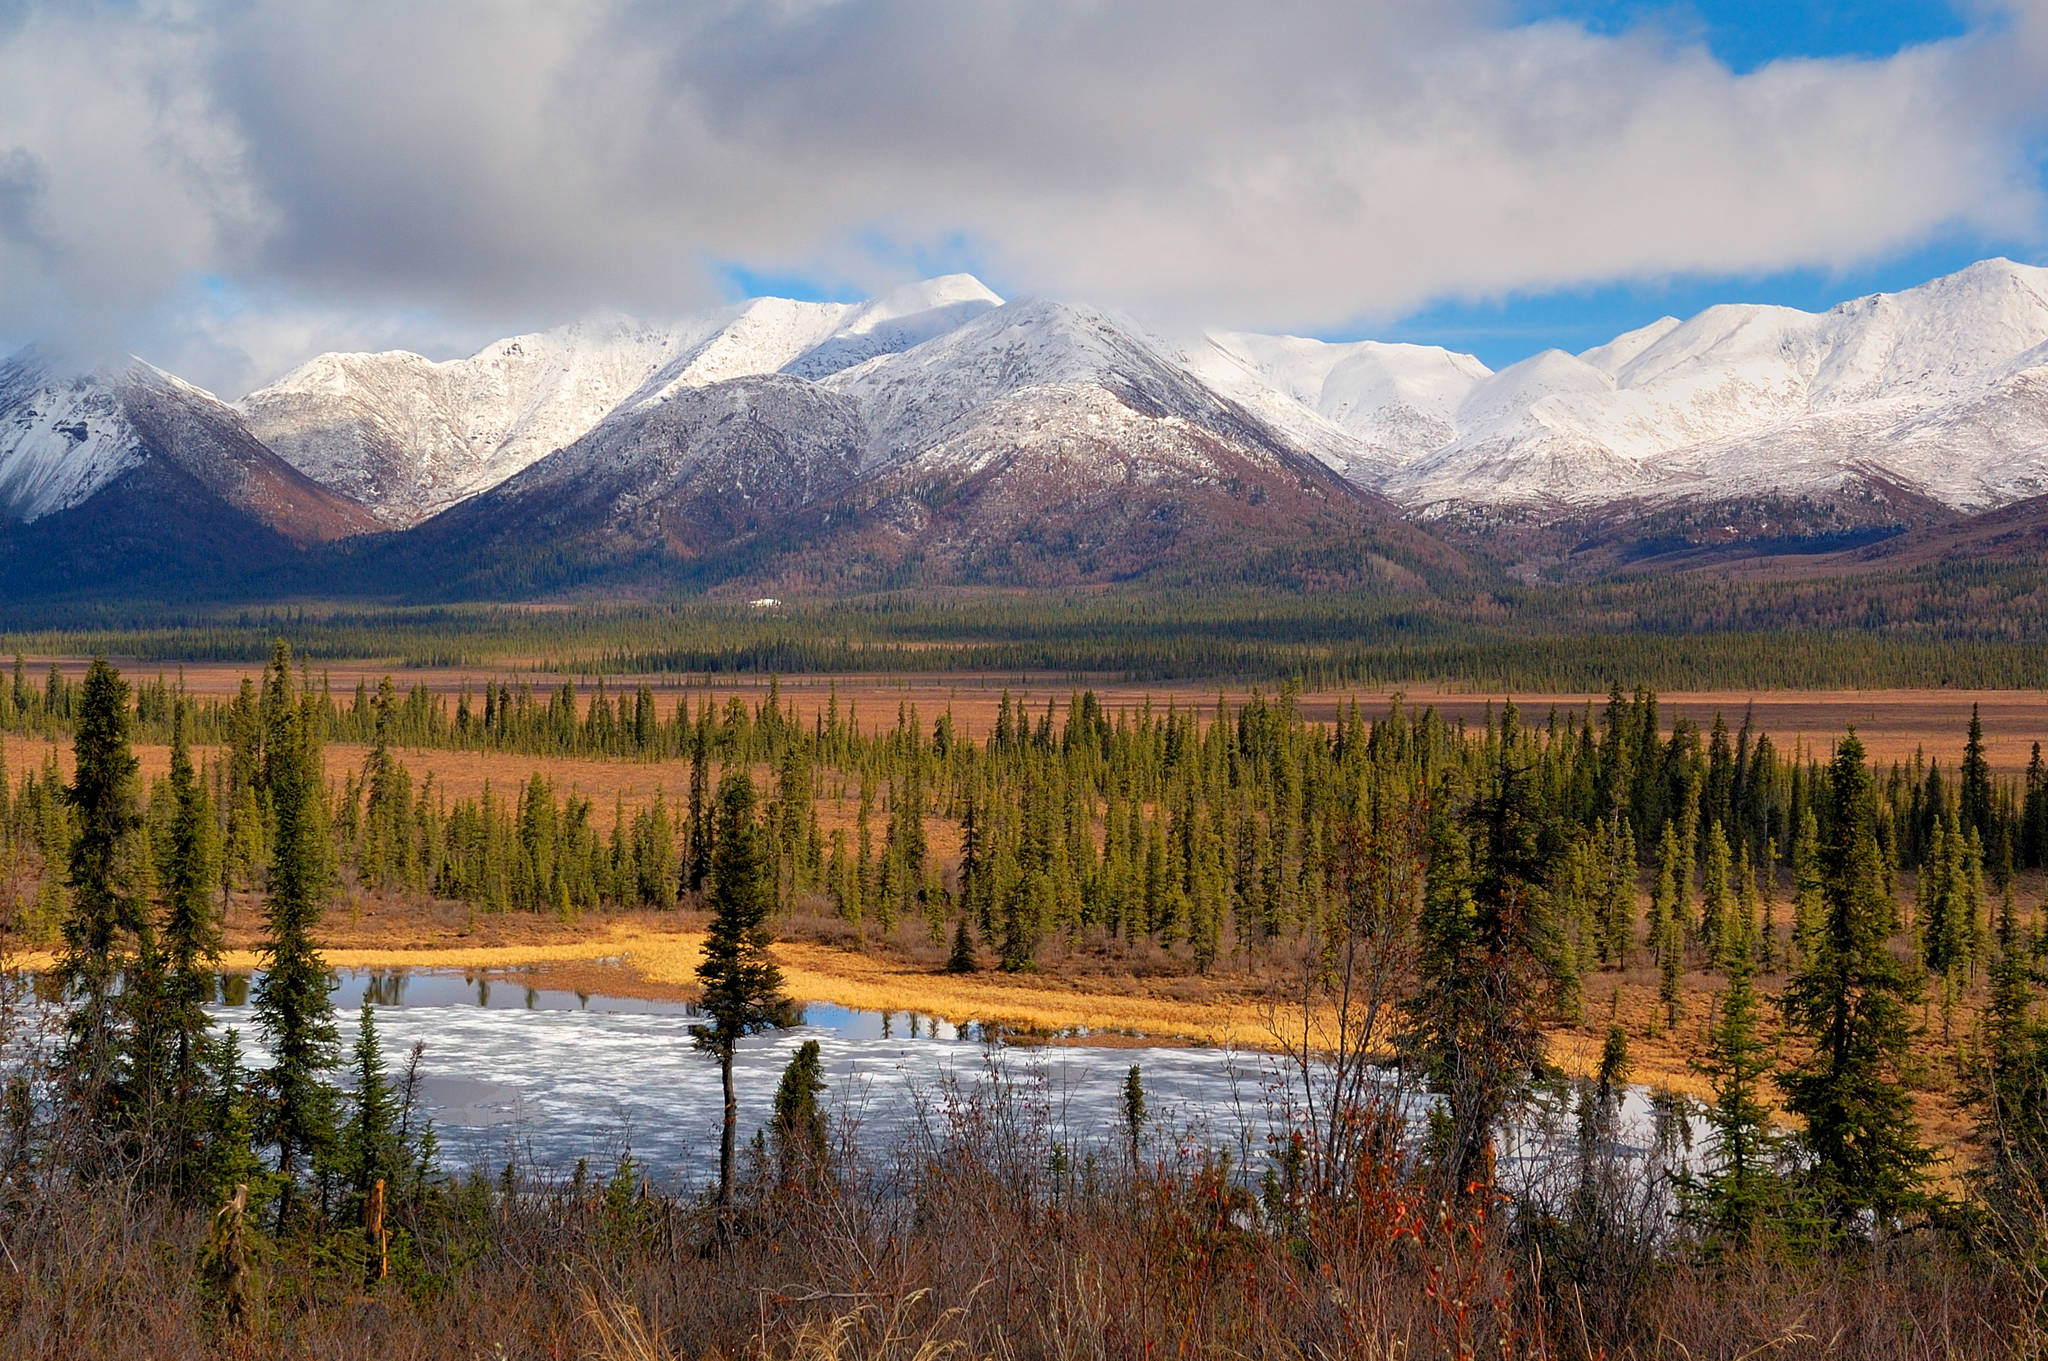 This March 2010 photo shows the view from Dead Dog Hill at Wrangell-St. Elias National Park and Preserve. (Courtesy Photo / Bryan Petrtyl, National Park Service)